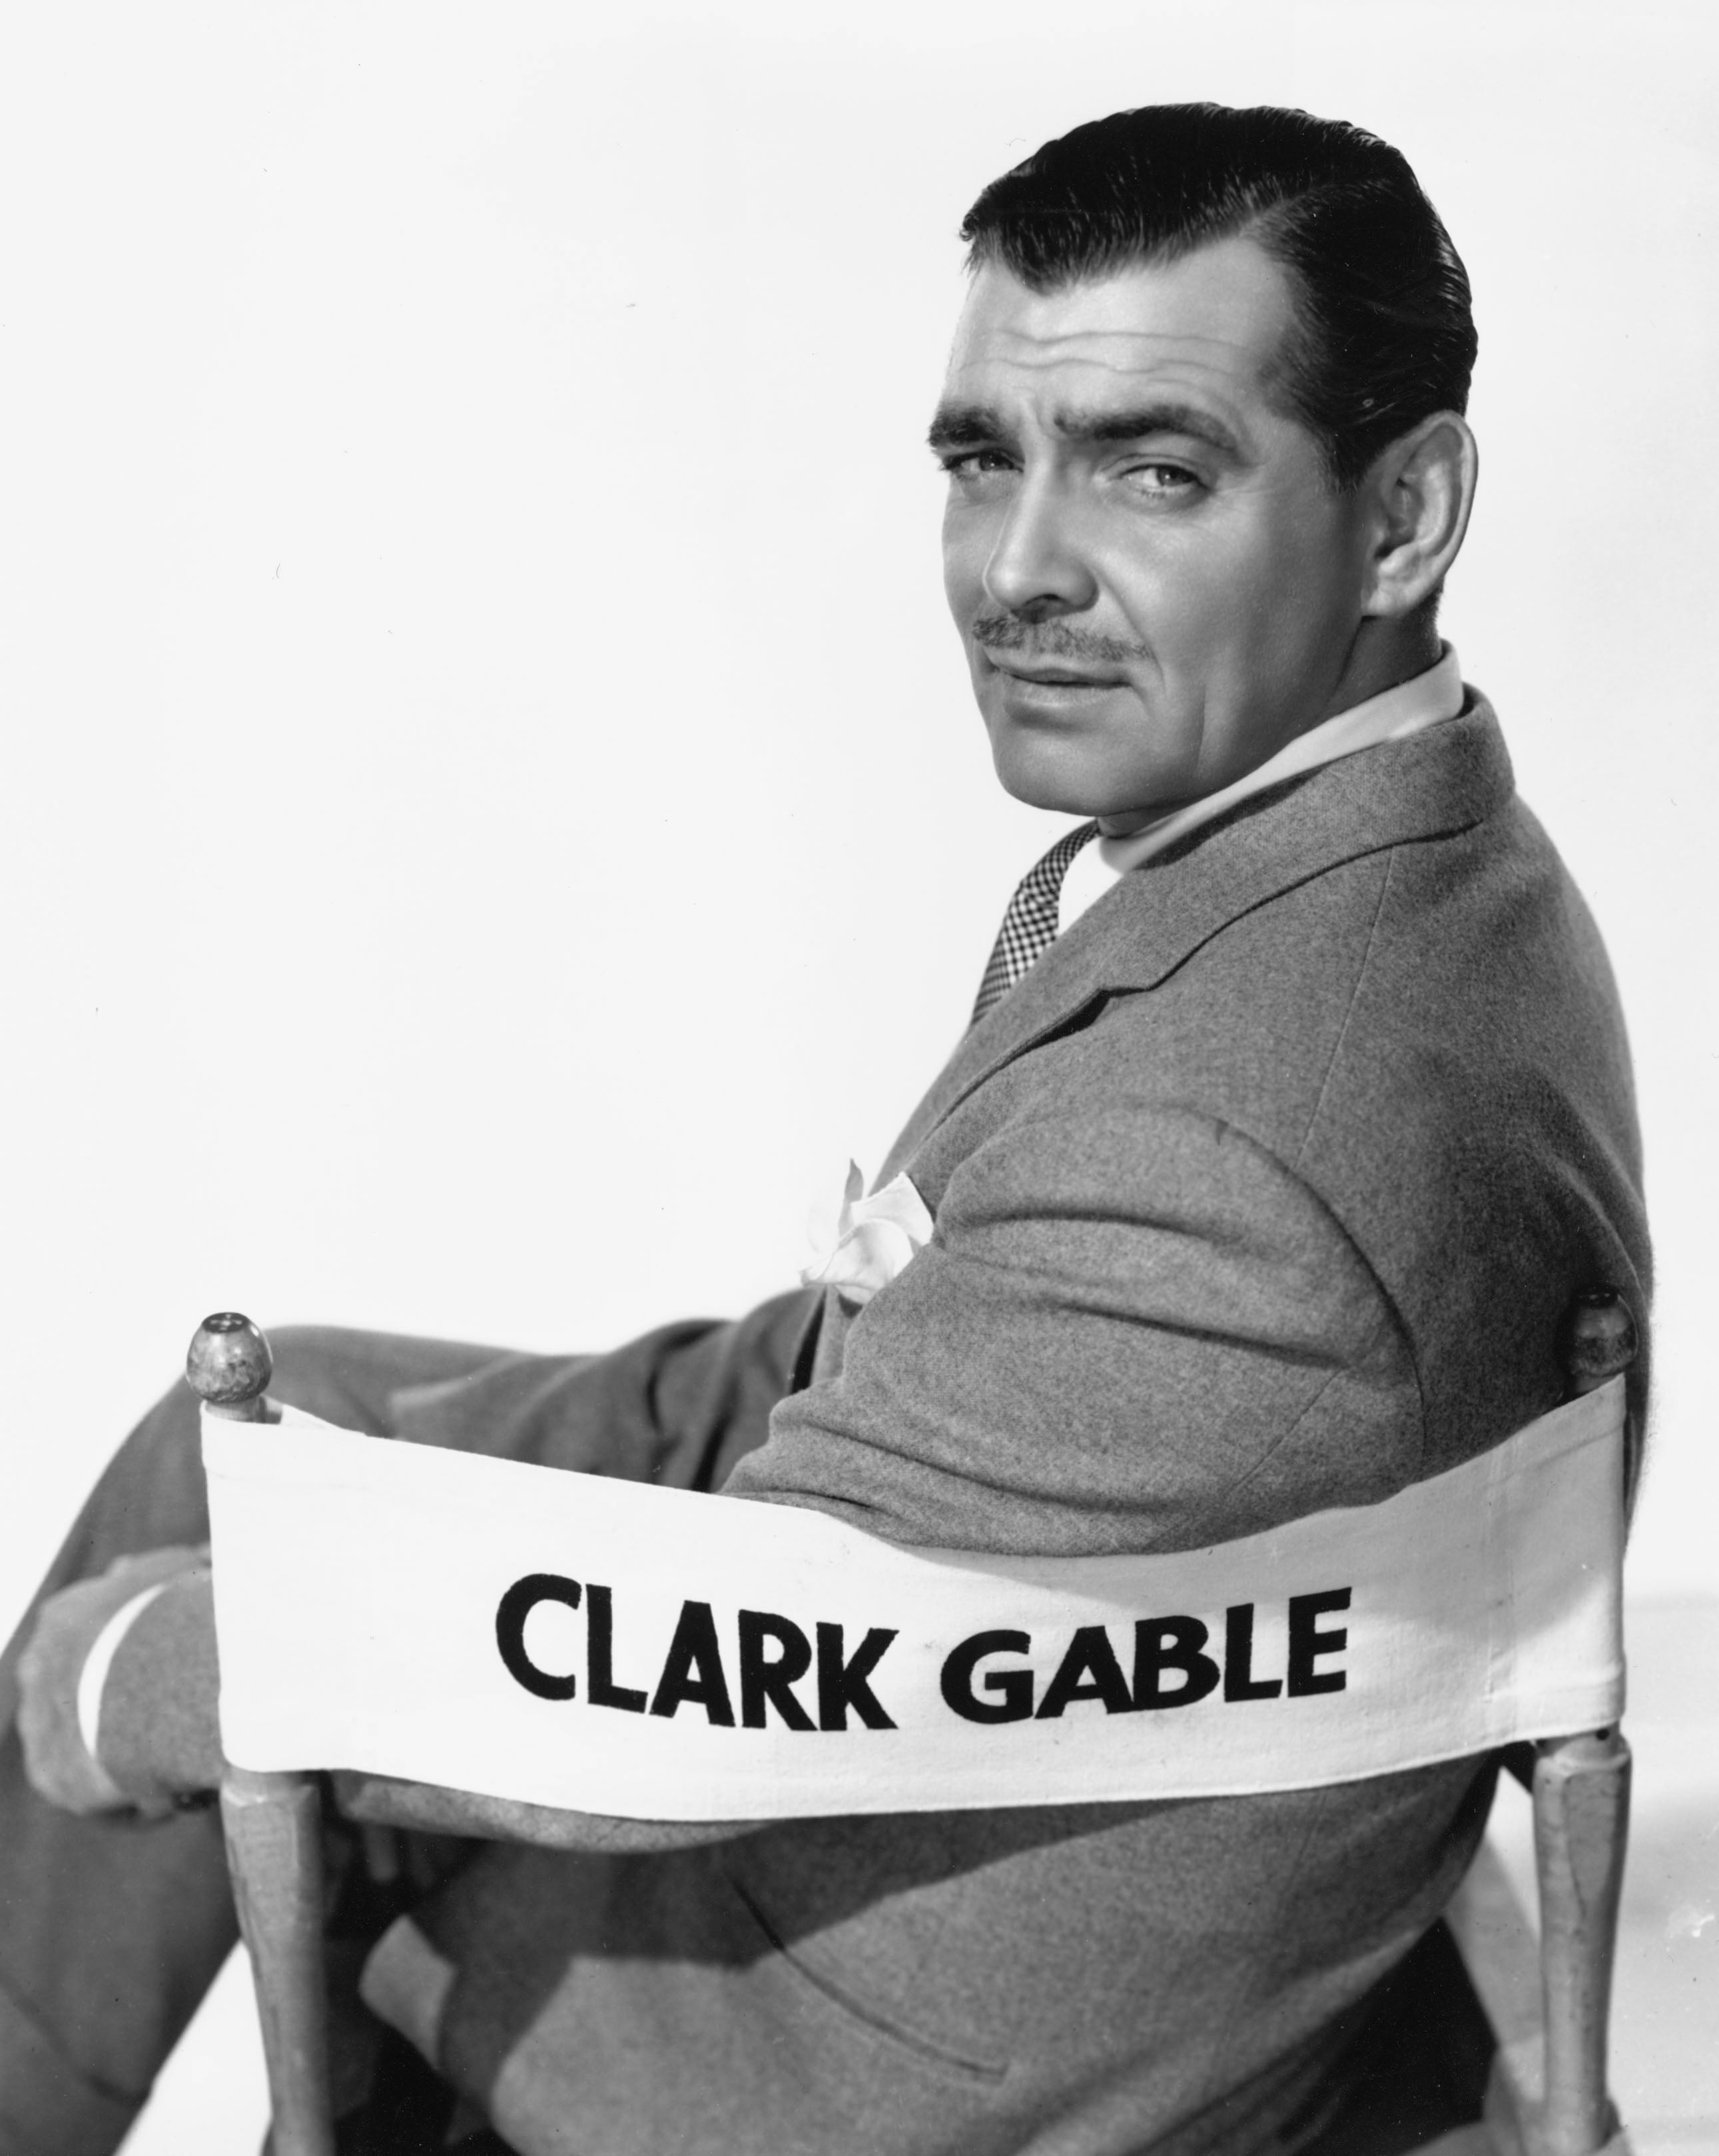 Clark Gable, Fleming suggests, was behind the wheel of a car when it ran over a lady on Sunset Boulevard